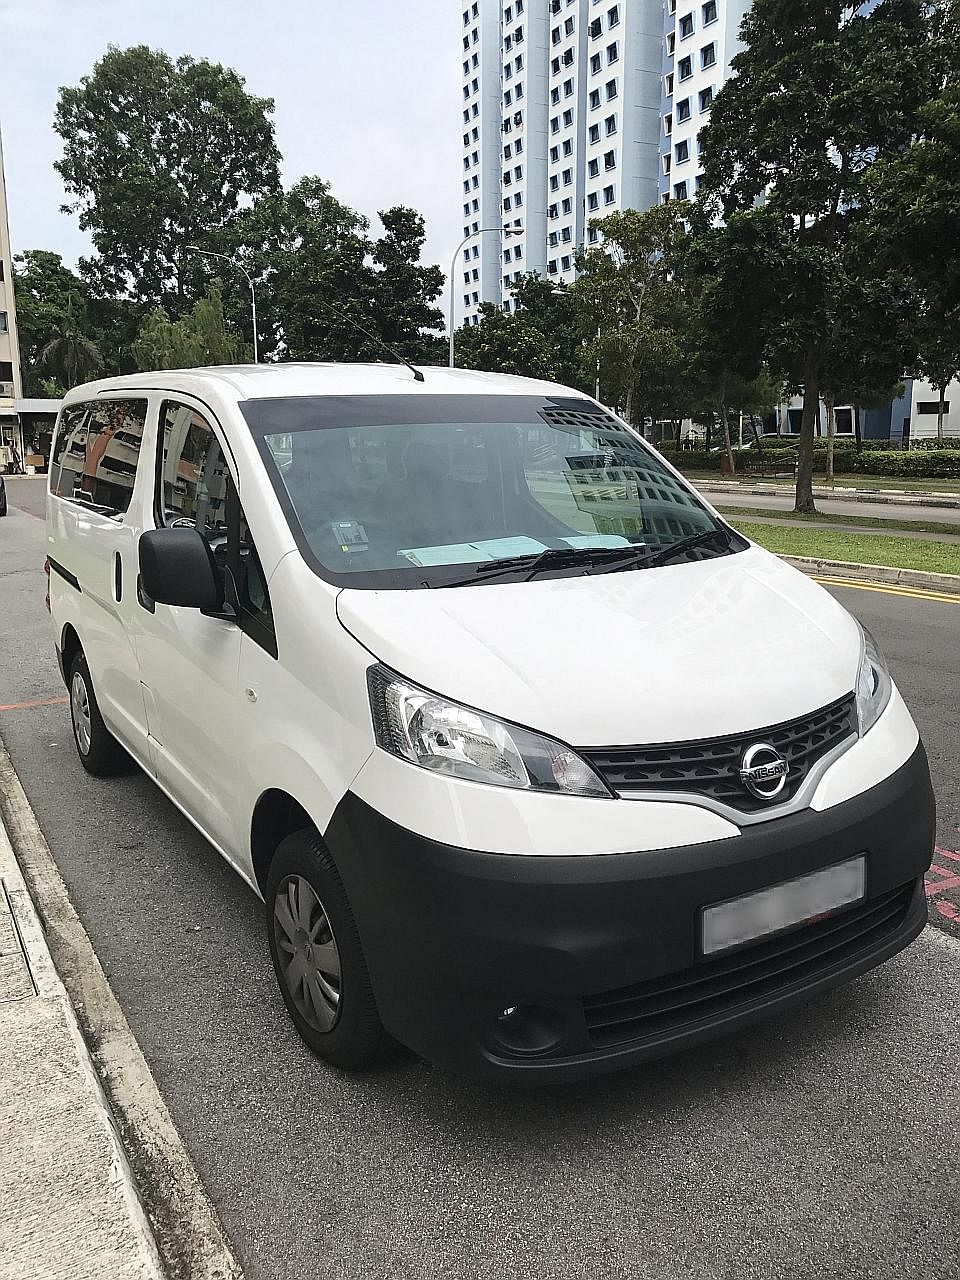 Mr Khristian Kelvin Koh found that the people who had stolen his van had thrown away many of his personal belongings. They even altered his licence plate, and clocked around 400km in the 15 hours they had the vehicle.